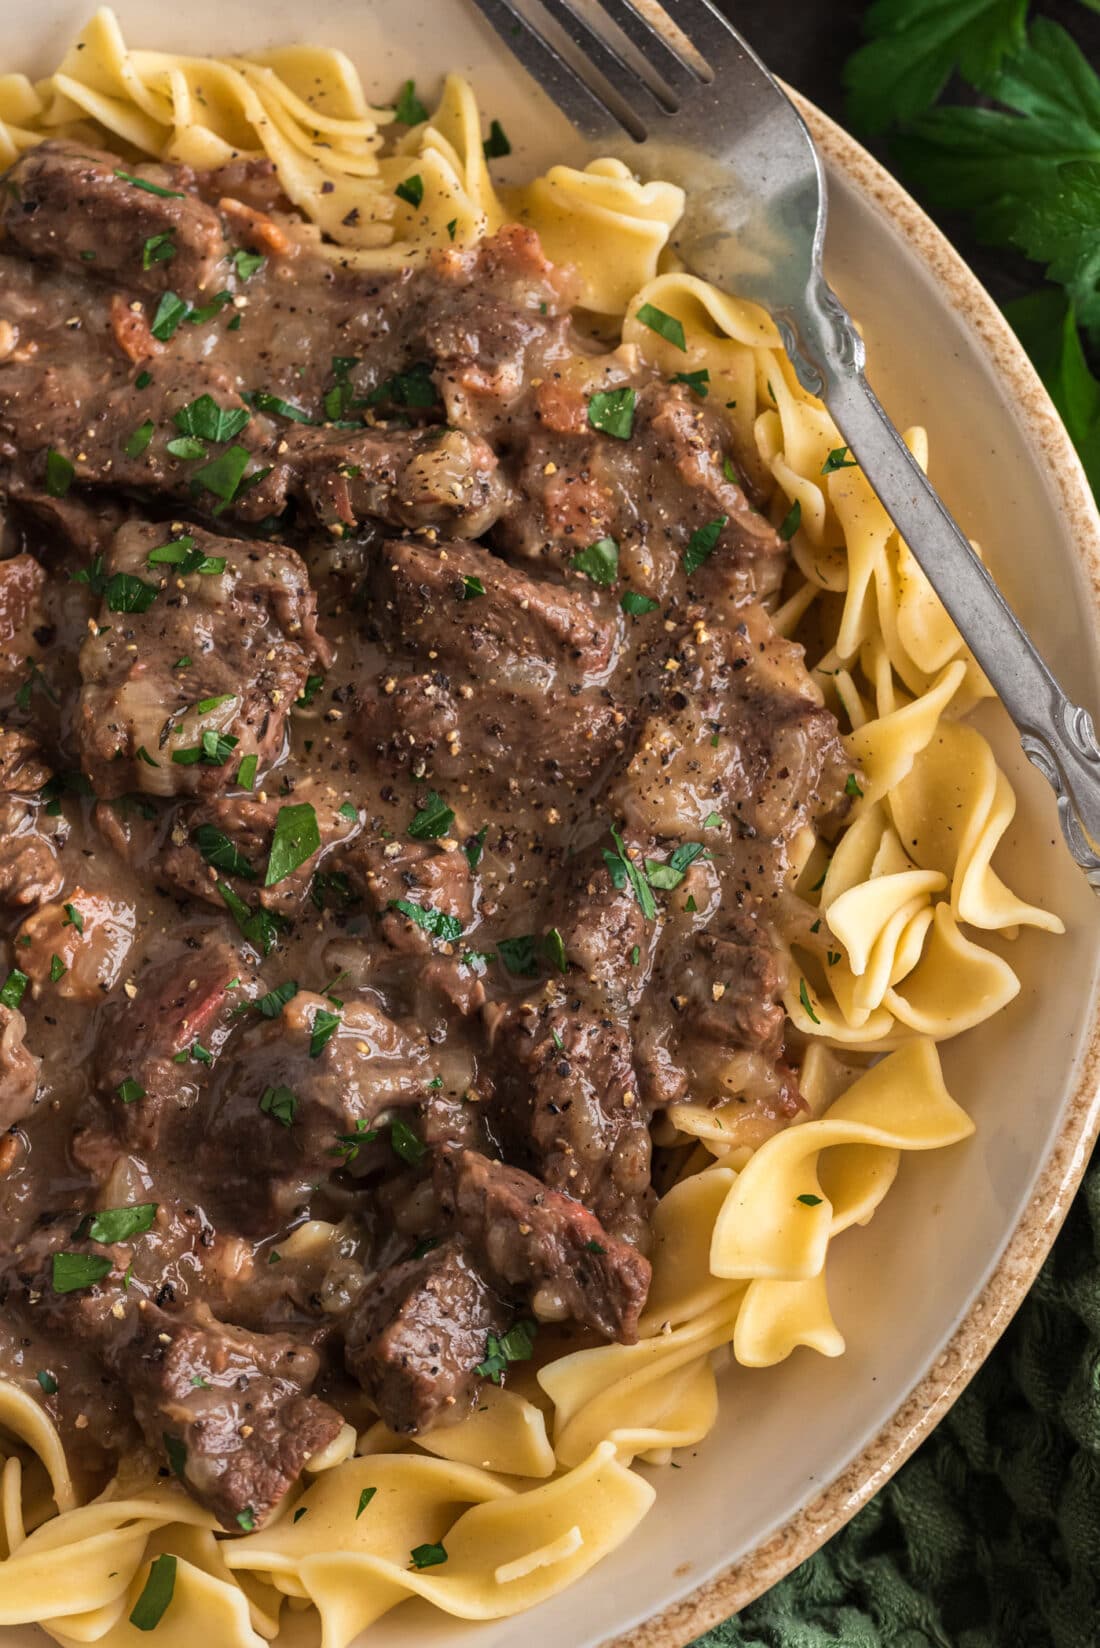 Overhead photo of a half a plate of Beef Carbonnade served over noodles